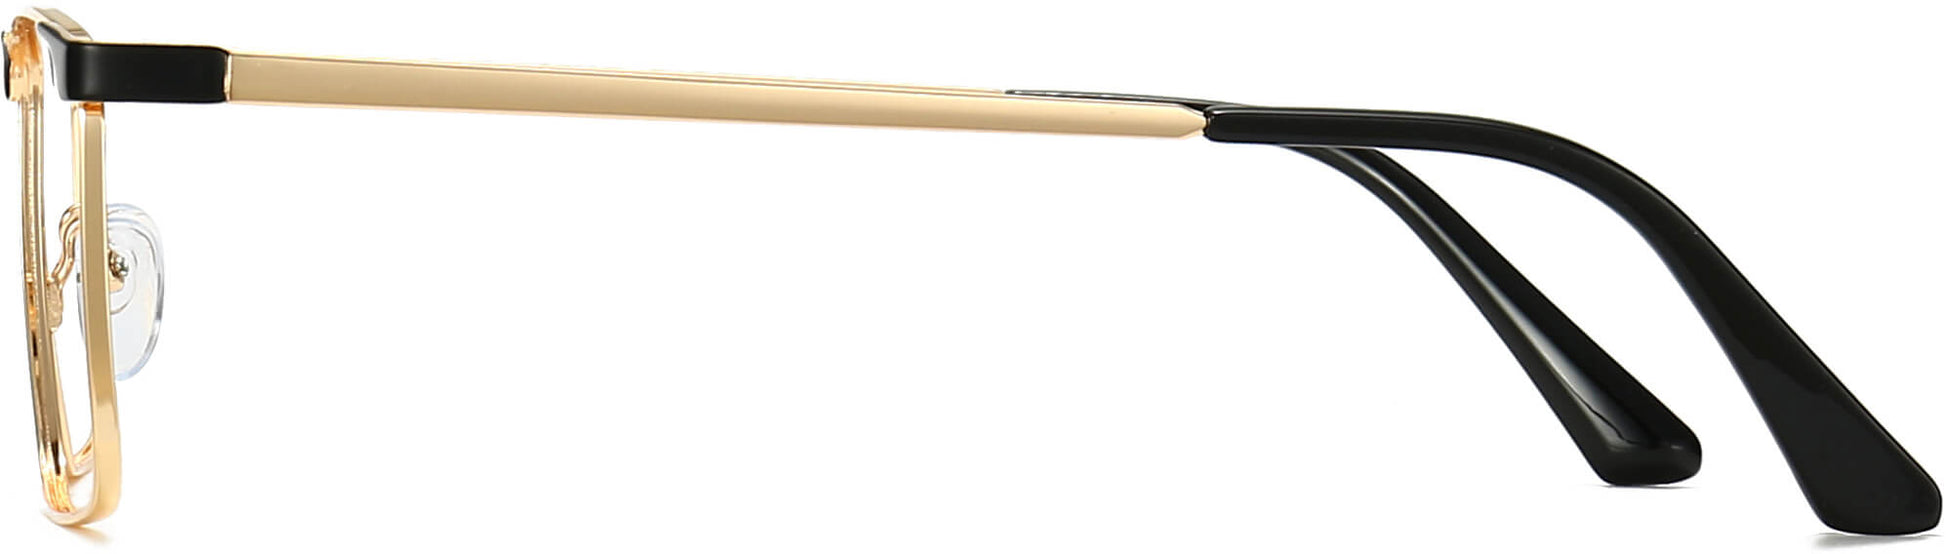 Uriah Square Gold Eyeglasses from ANRRI, side view